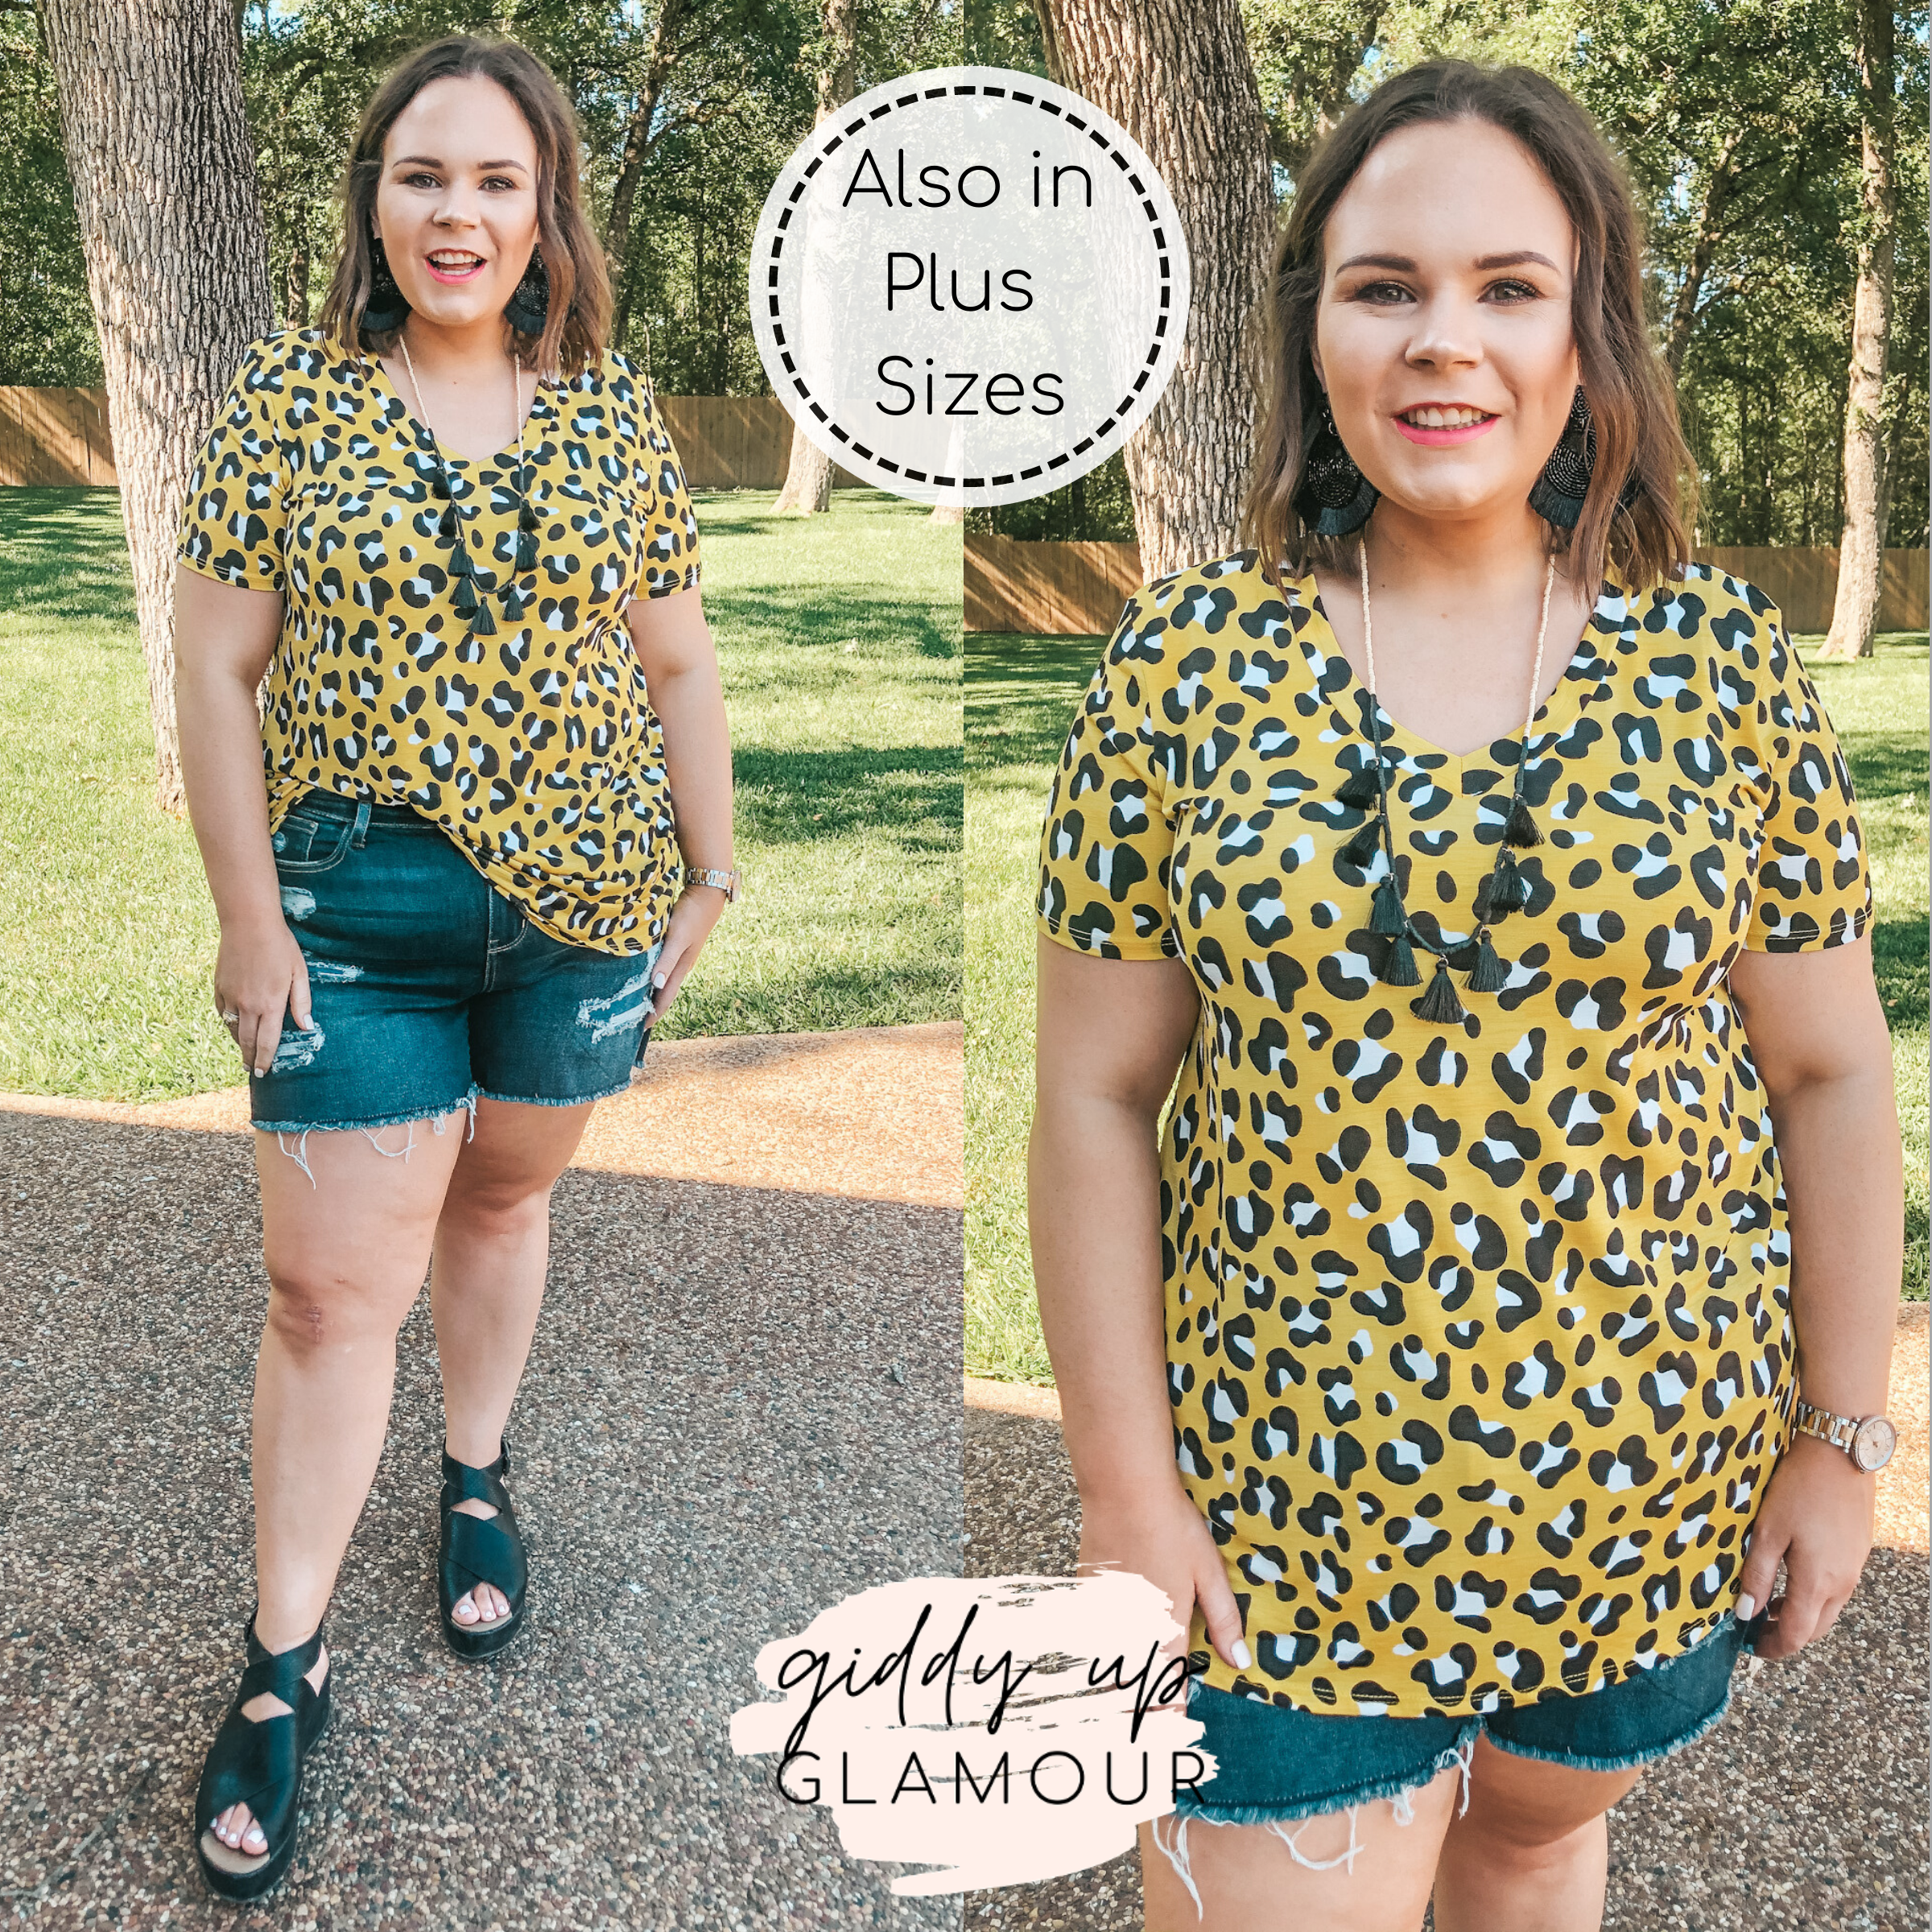 Last Chance Small | Keep Things Simple Leopard V Neck Tee in Yellow - Giddy Up Glamour Boutique